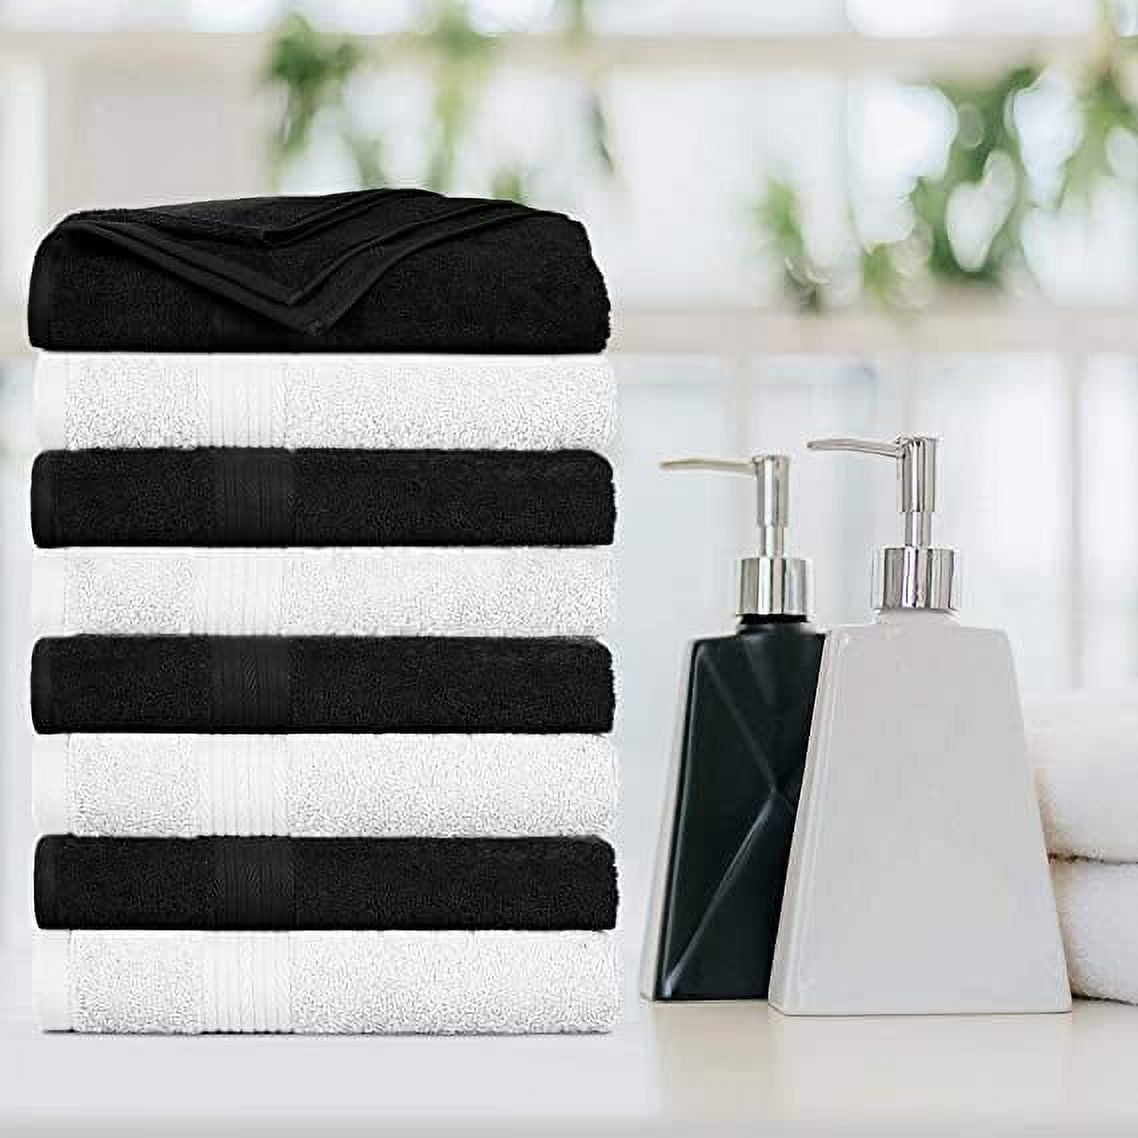 xigua 2 Pack Black Christmas Tree Bath Towel Bathroom Towels for Hand Face,  Absorbent Washcloth for Gym Bathing Home Shower